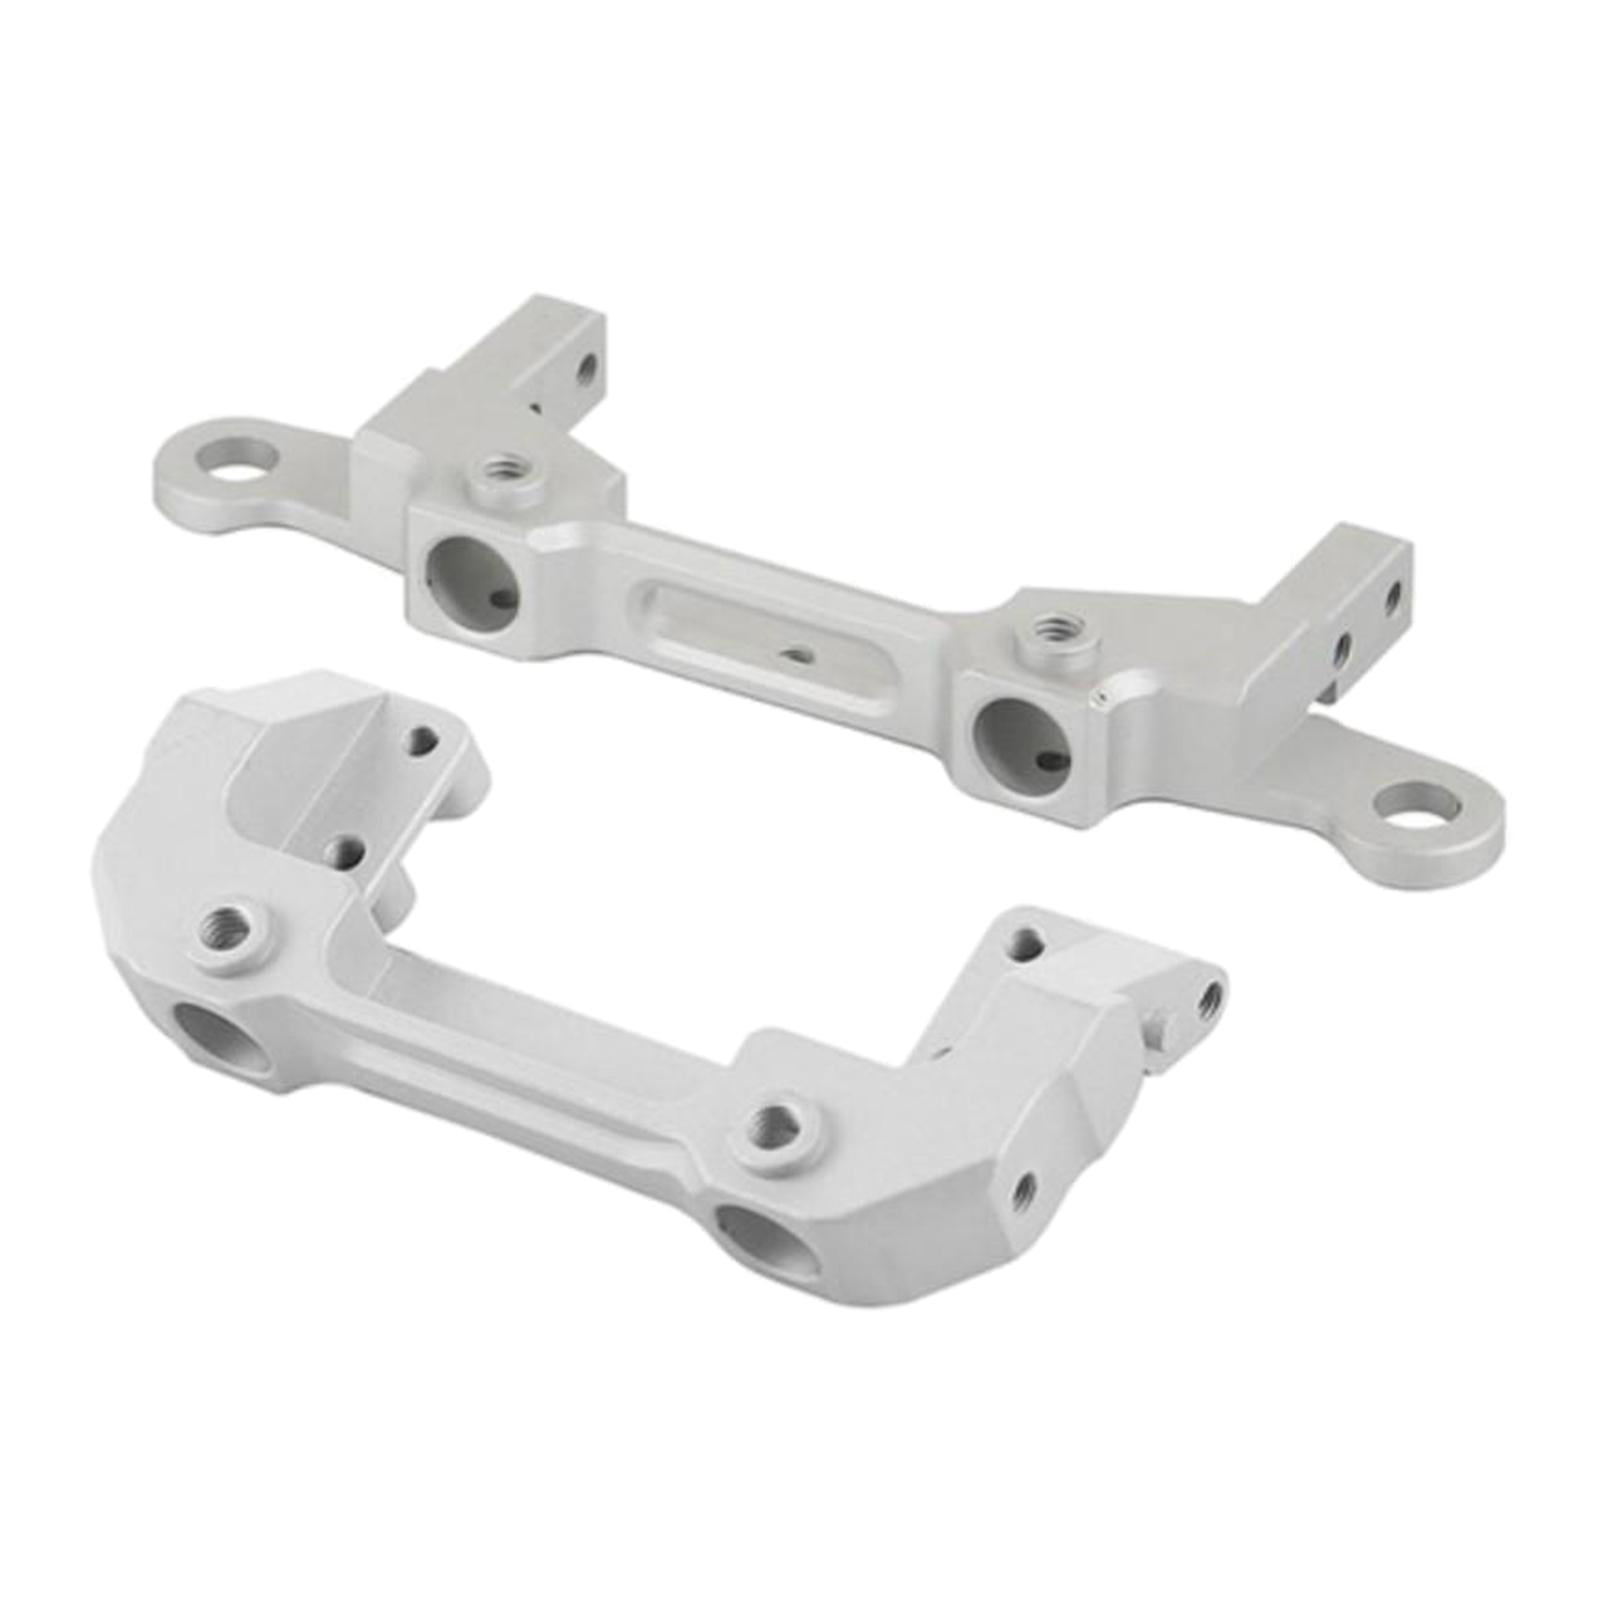 Rear Set SILVER For Axial SCX10 UpGraded METAL BUMPER BRACKET MOUNTS Front 